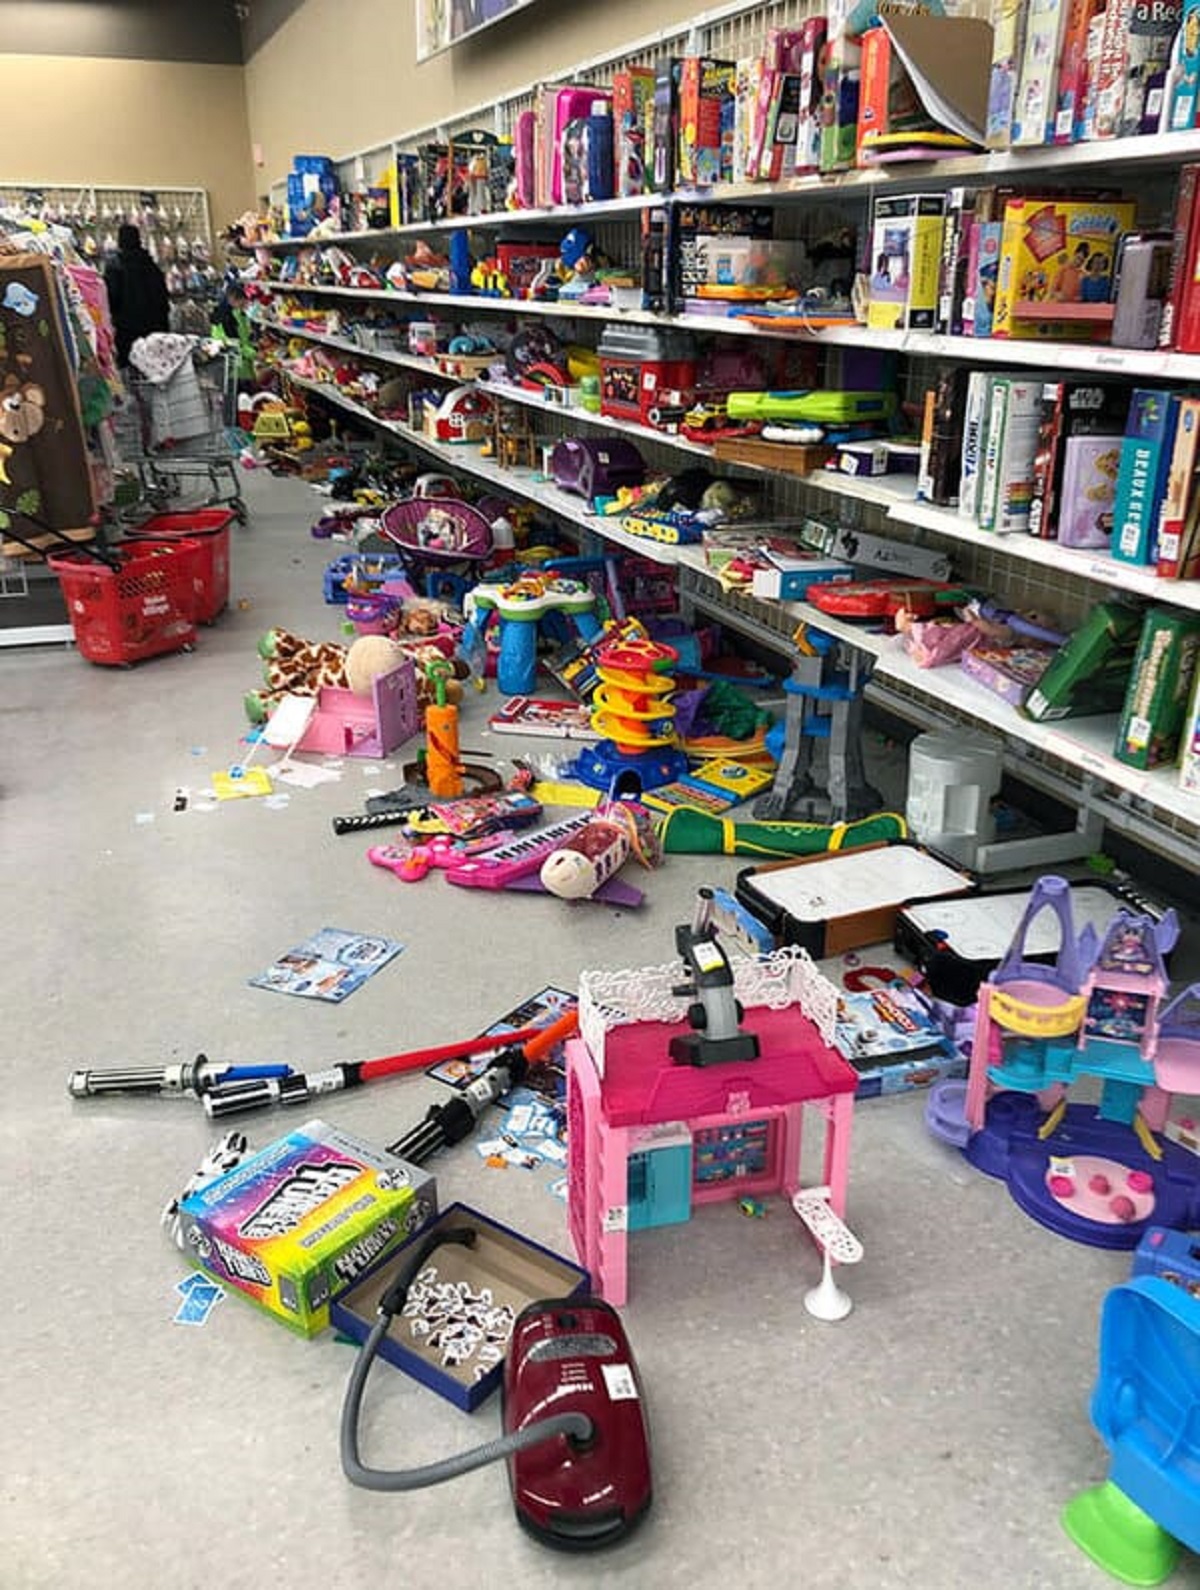 “Attention Parents! Thrift Stores Are Not Your Daycare. Clean Up After Your Kids”